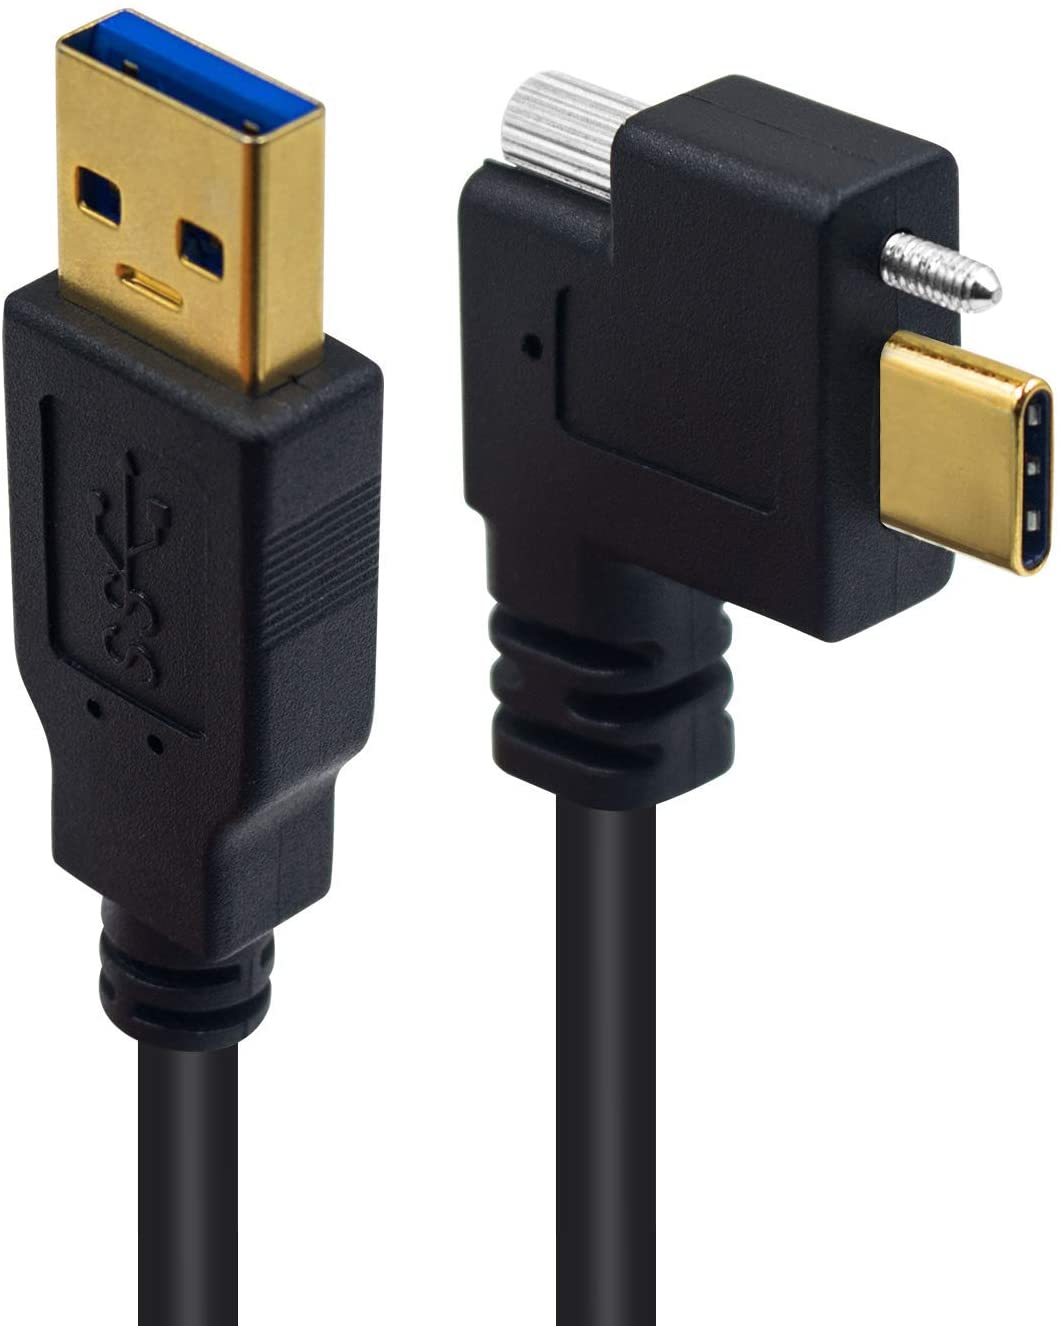 USB-A 3.0 Male to USB-C Male with Single Locking Screw High Speed Cable